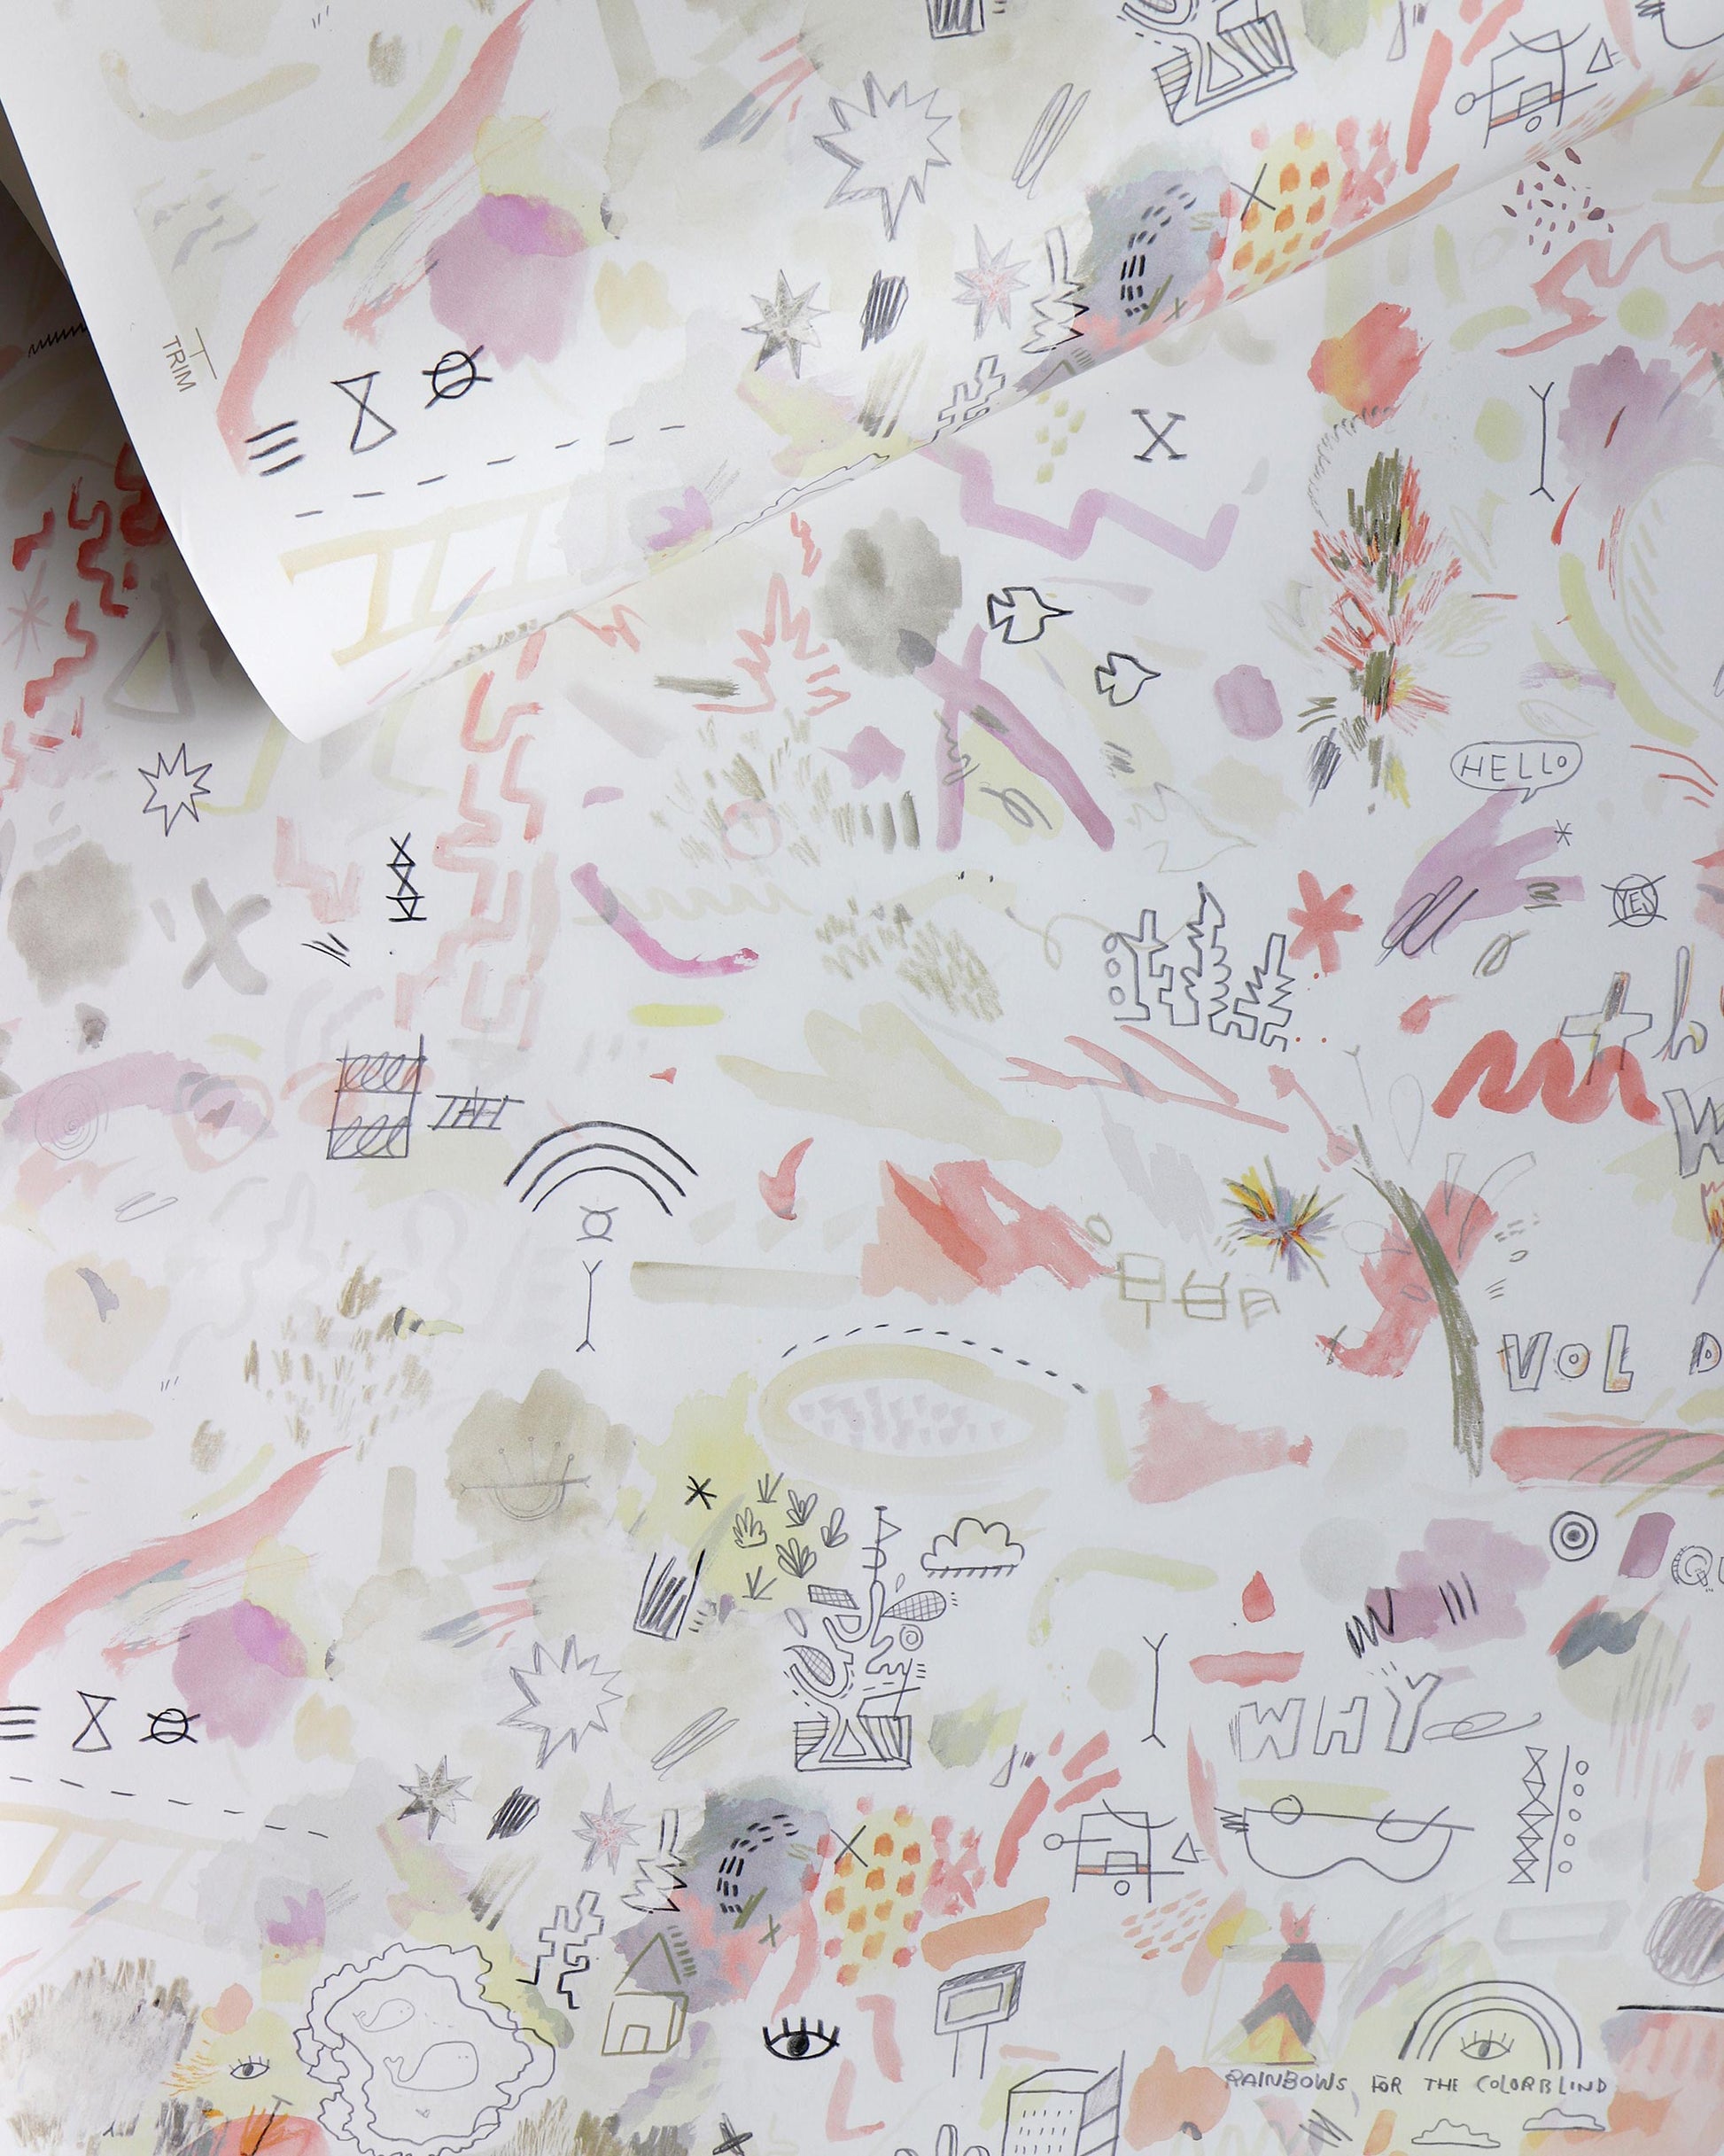 A piece of Vol de Nuit Wallpaper Sunshine with a lot of drawings on it